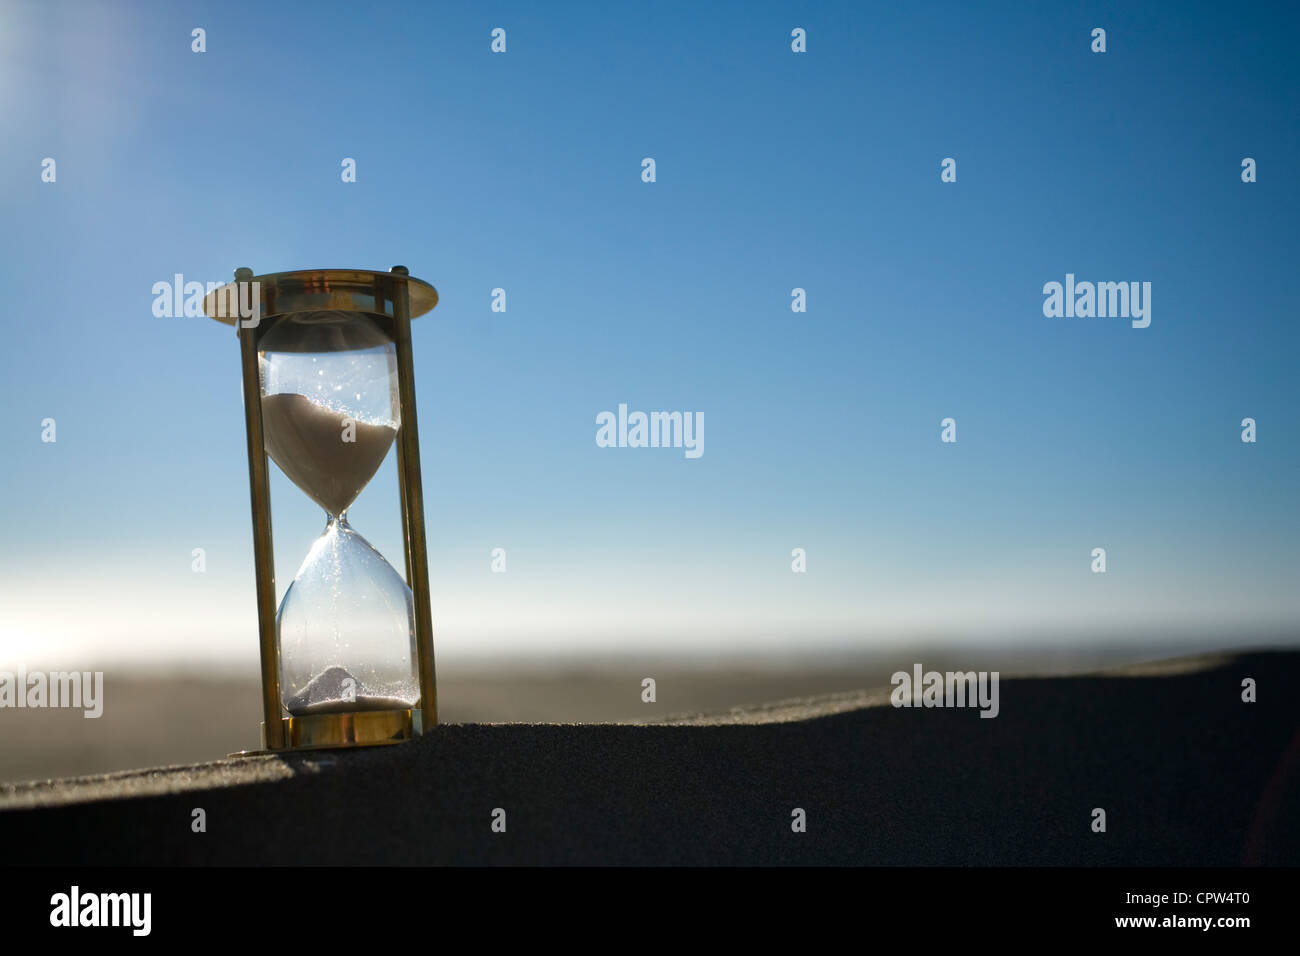 Backlit sand timer on the peak of a sand dune, with sand and sky behind it. Stock Photo